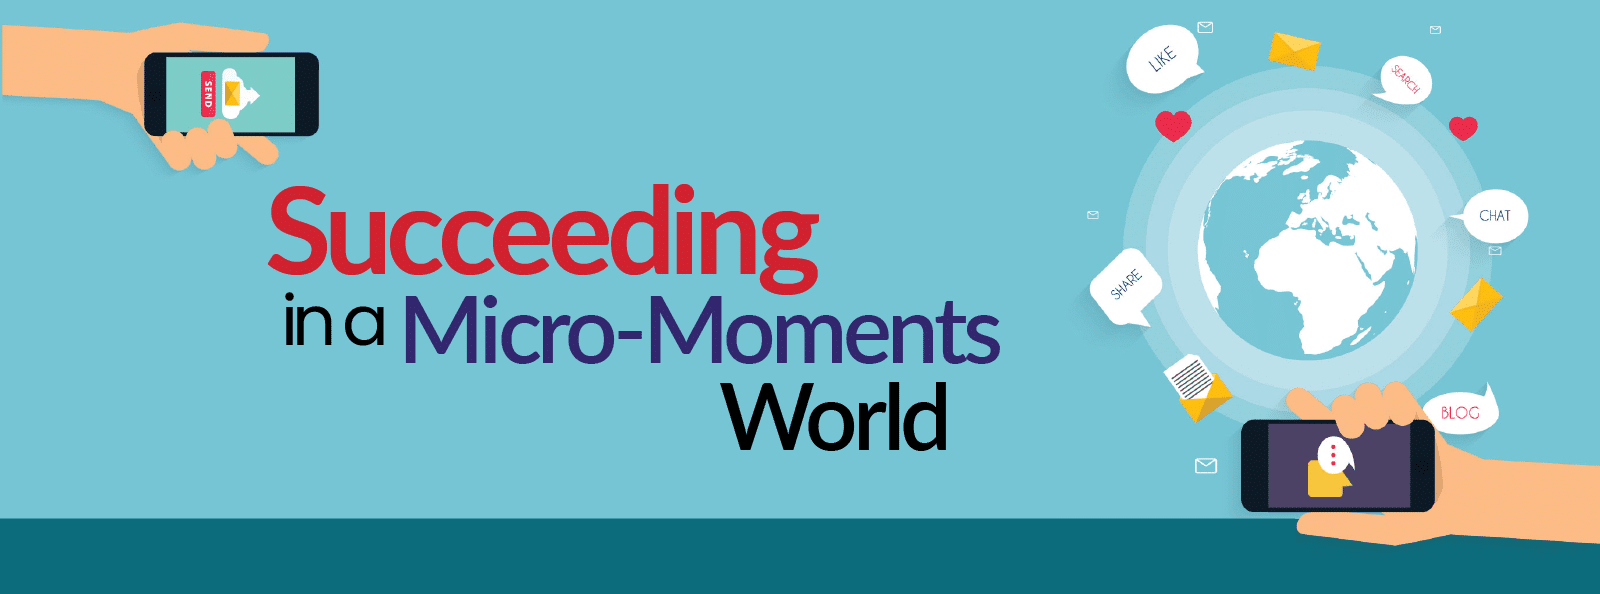 Succeeding-in-a-MicroMoments-World-1600x594-01